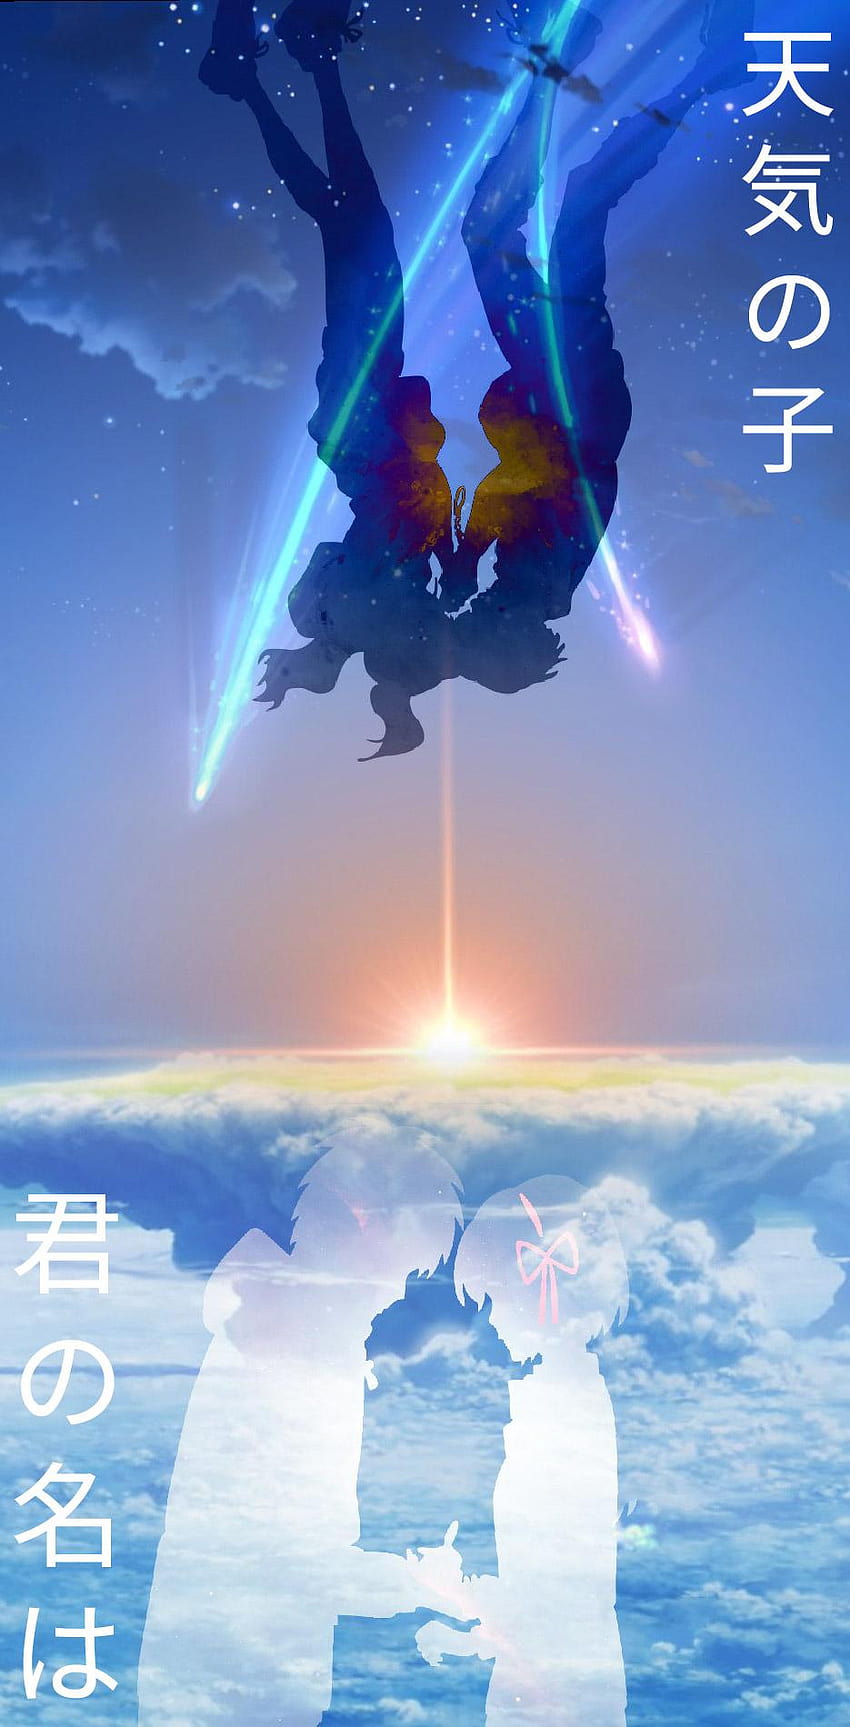 Your name and weathering with you HD phone wallpaper